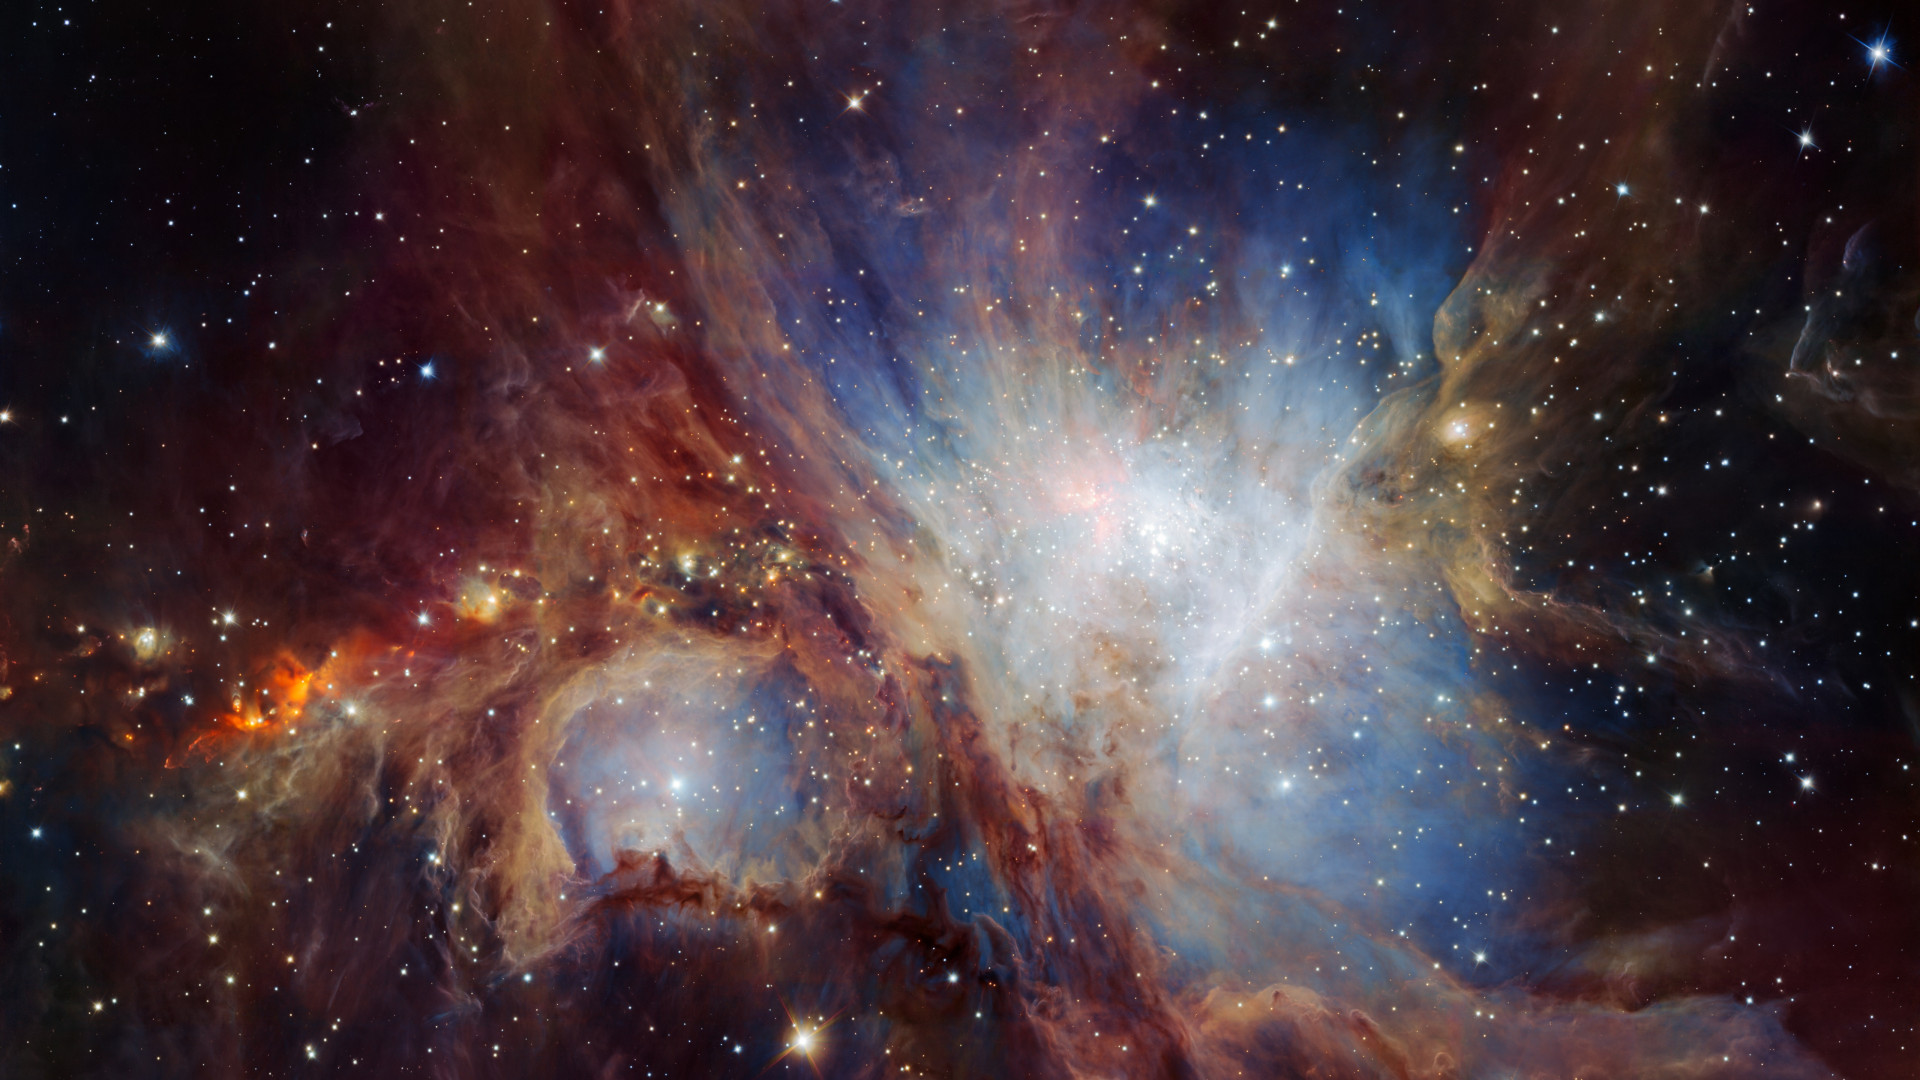 Download wallpaper: Infrared view of the Orion Nebula 1920x1080